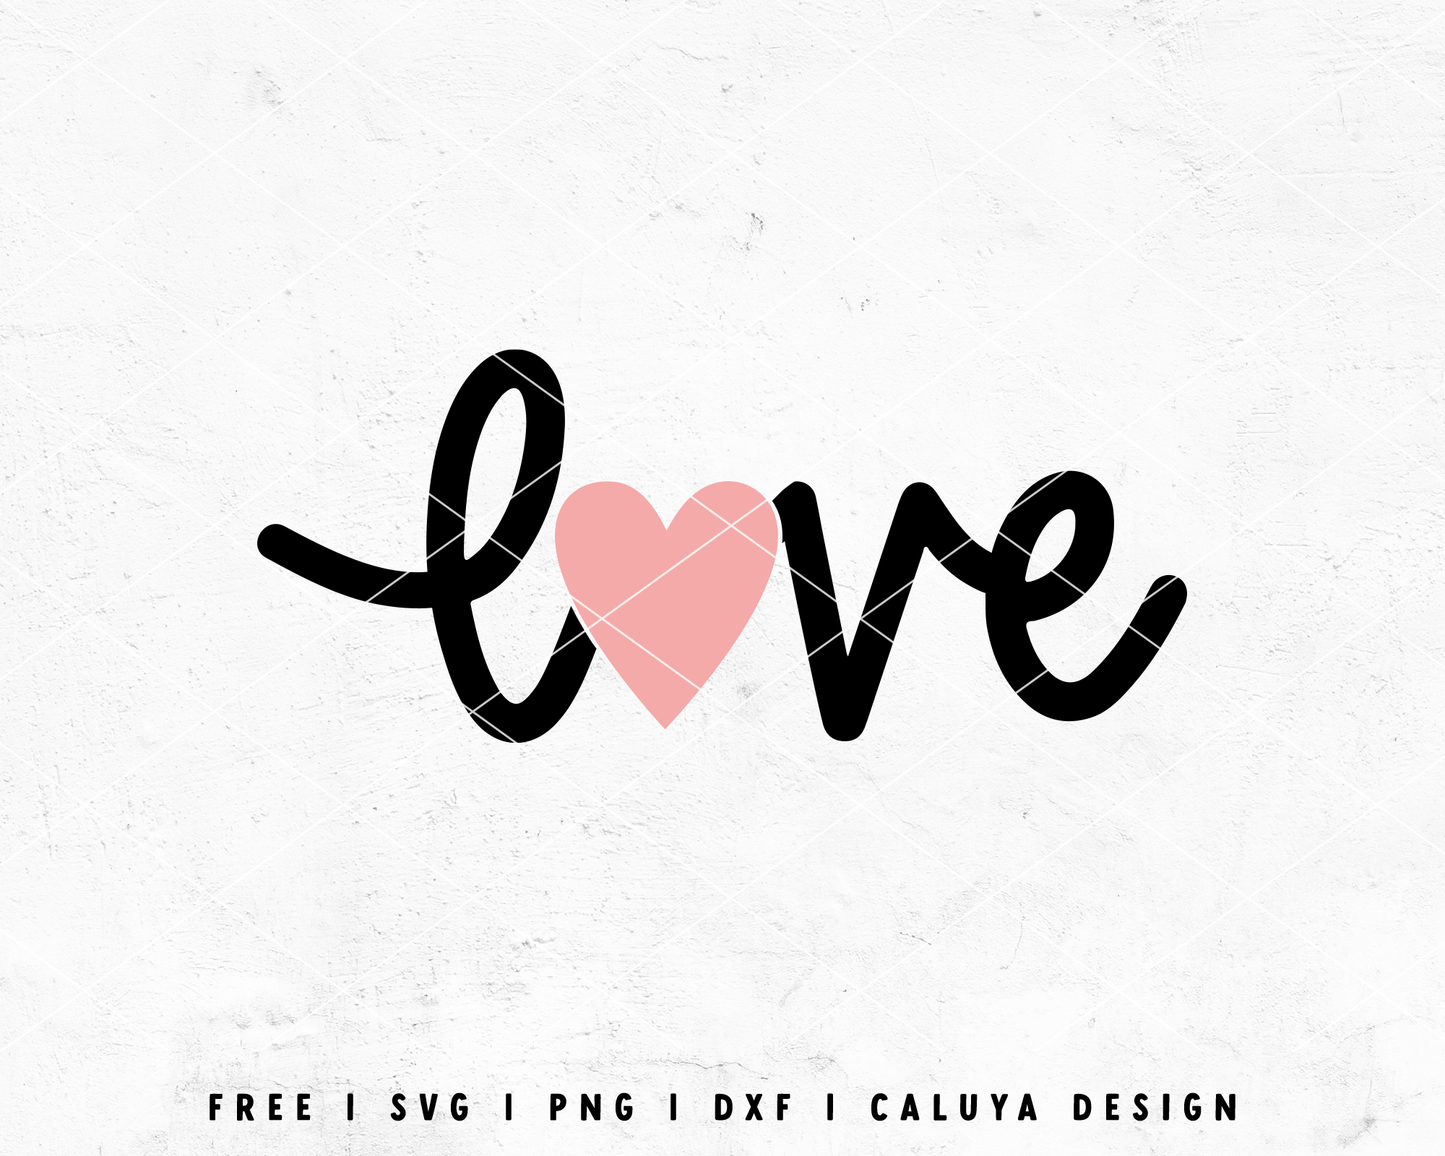 FREE Love SVG | Valentines Day SVG | Heart Love SVG Cut File for Cricut ...